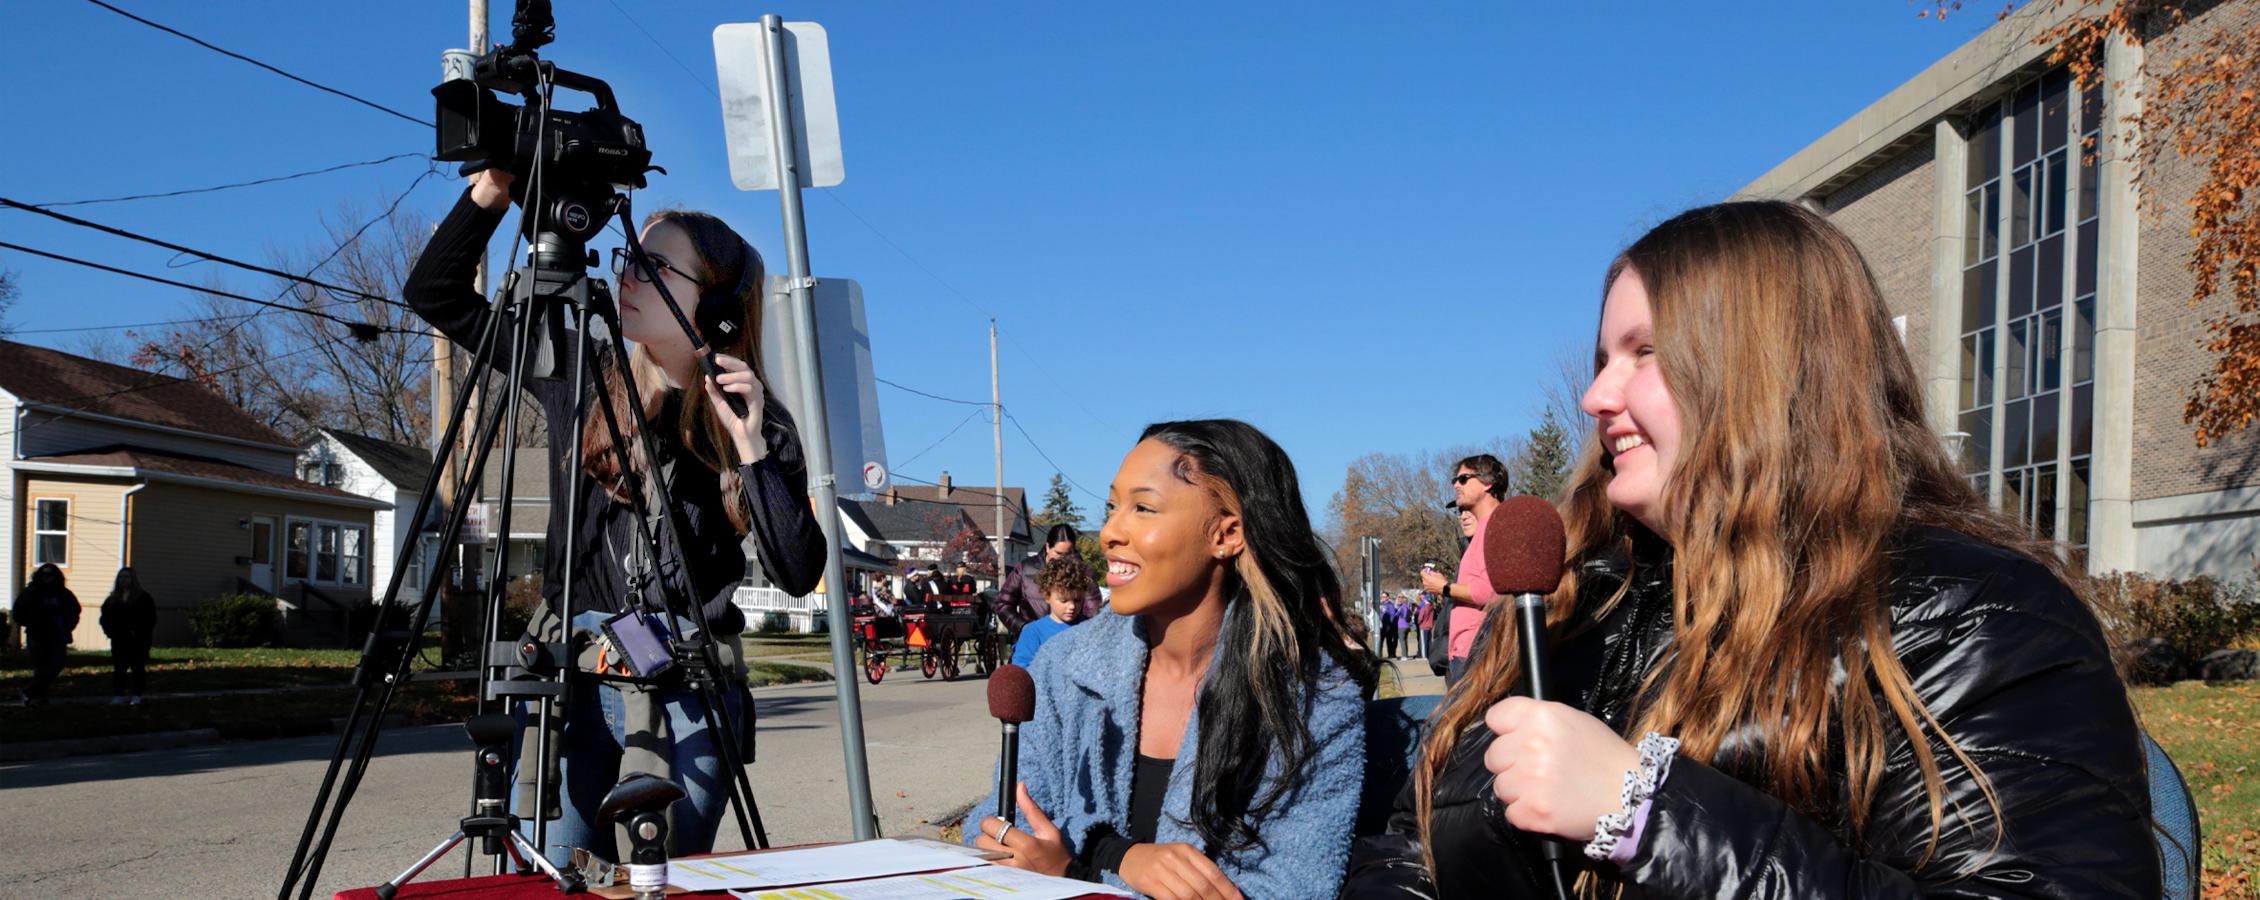 Two students hold microphones and one student works a video camera during a Homecoming parade.